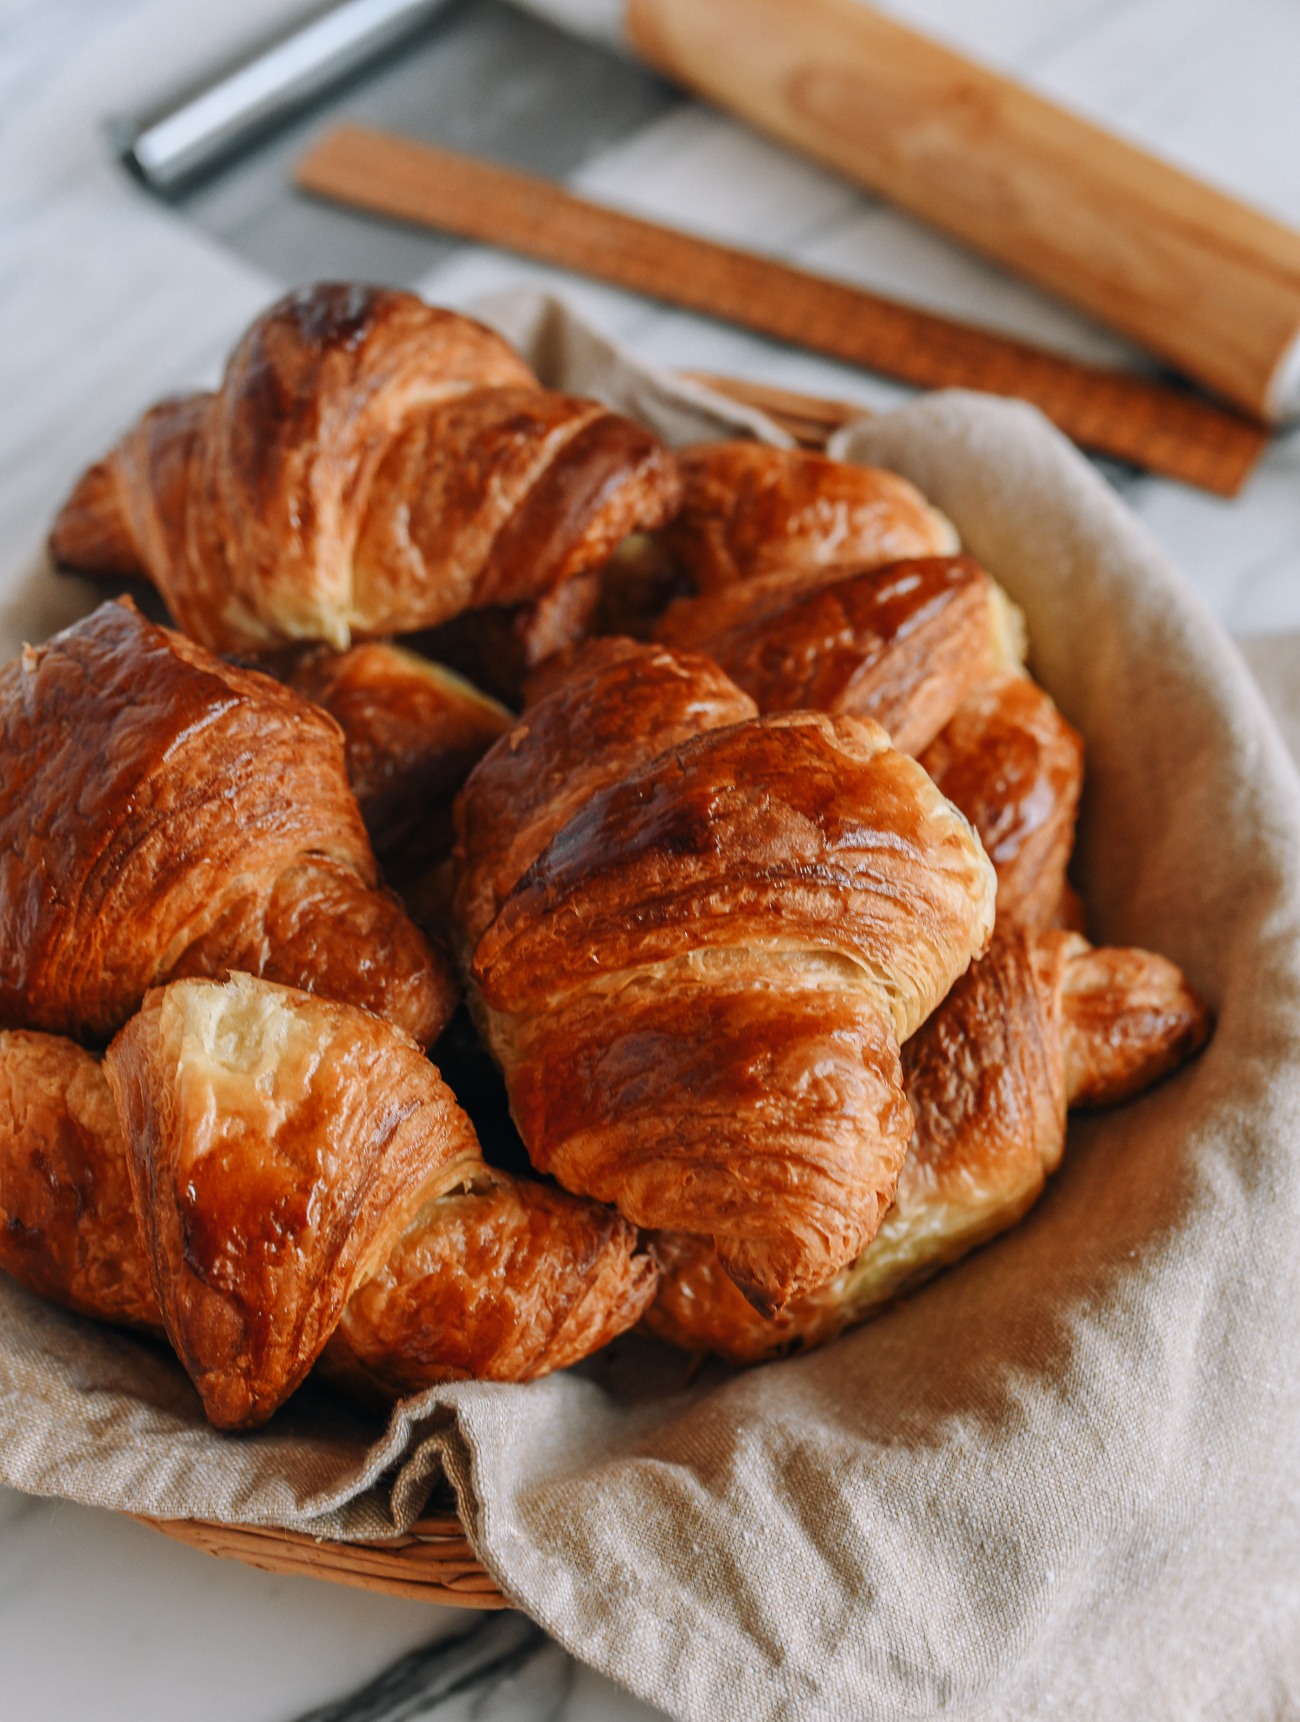 How to Make Croissants - basket of homemade croissants